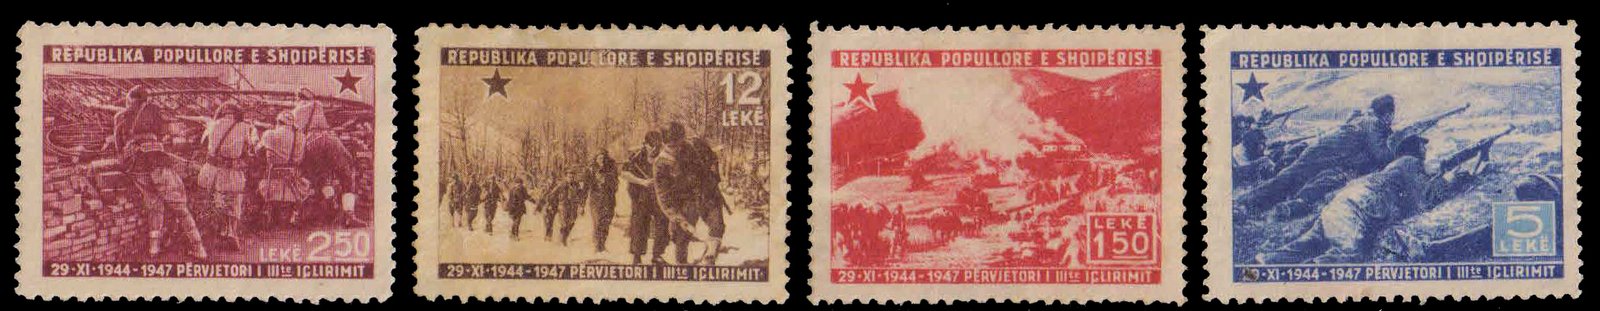 ALBANIA 1947, Liberation, Weapons, Army, Set of 4, Mint G/W, S.G. 487-91-Cat £ 49-